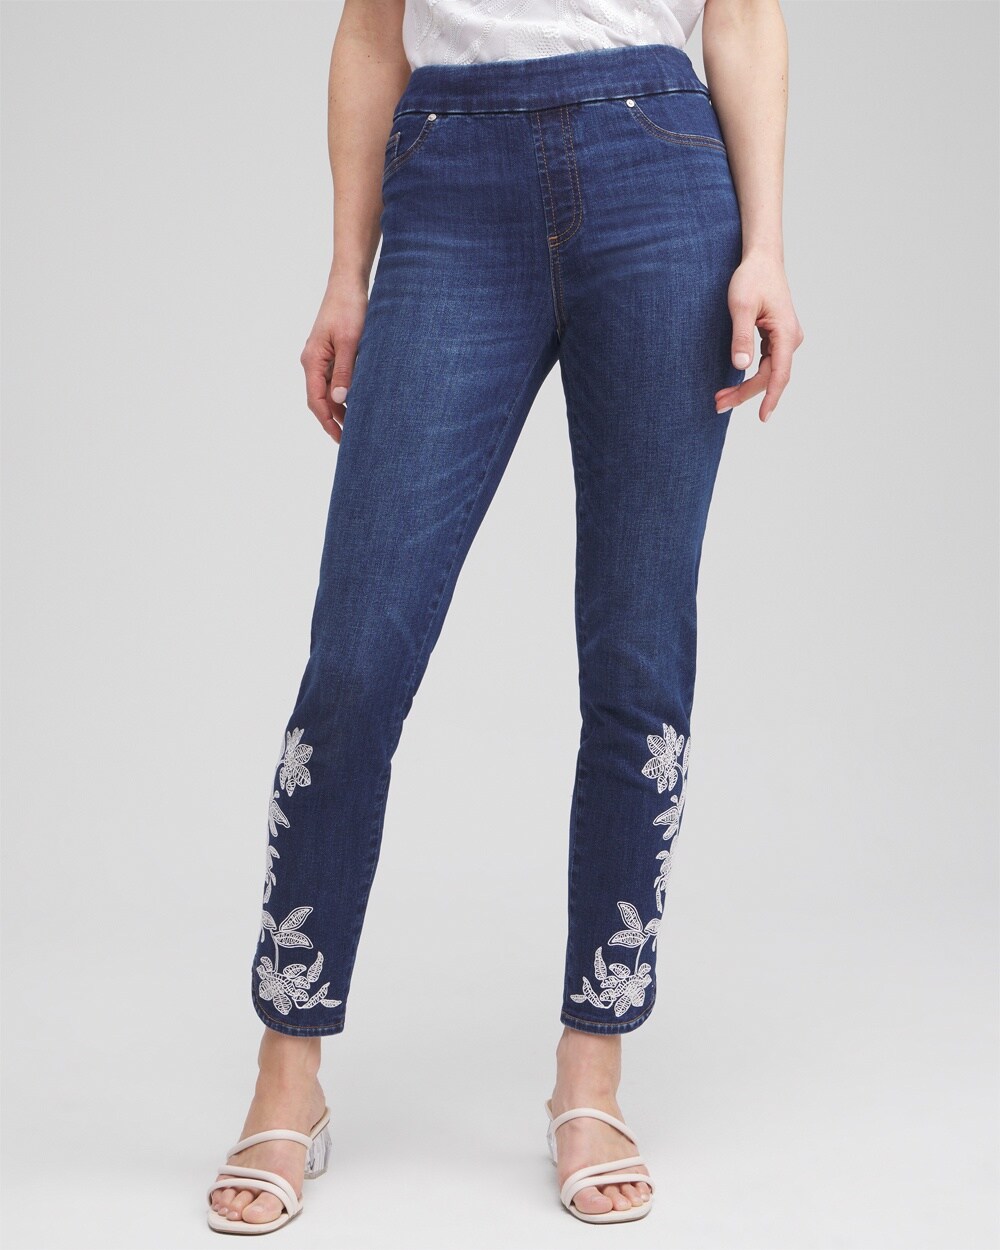 Chico's Embroidered Pull-on Ankle Jeggings In Medium Wash Denim Size 4p/6p Petite |  In Morwenna Indigo